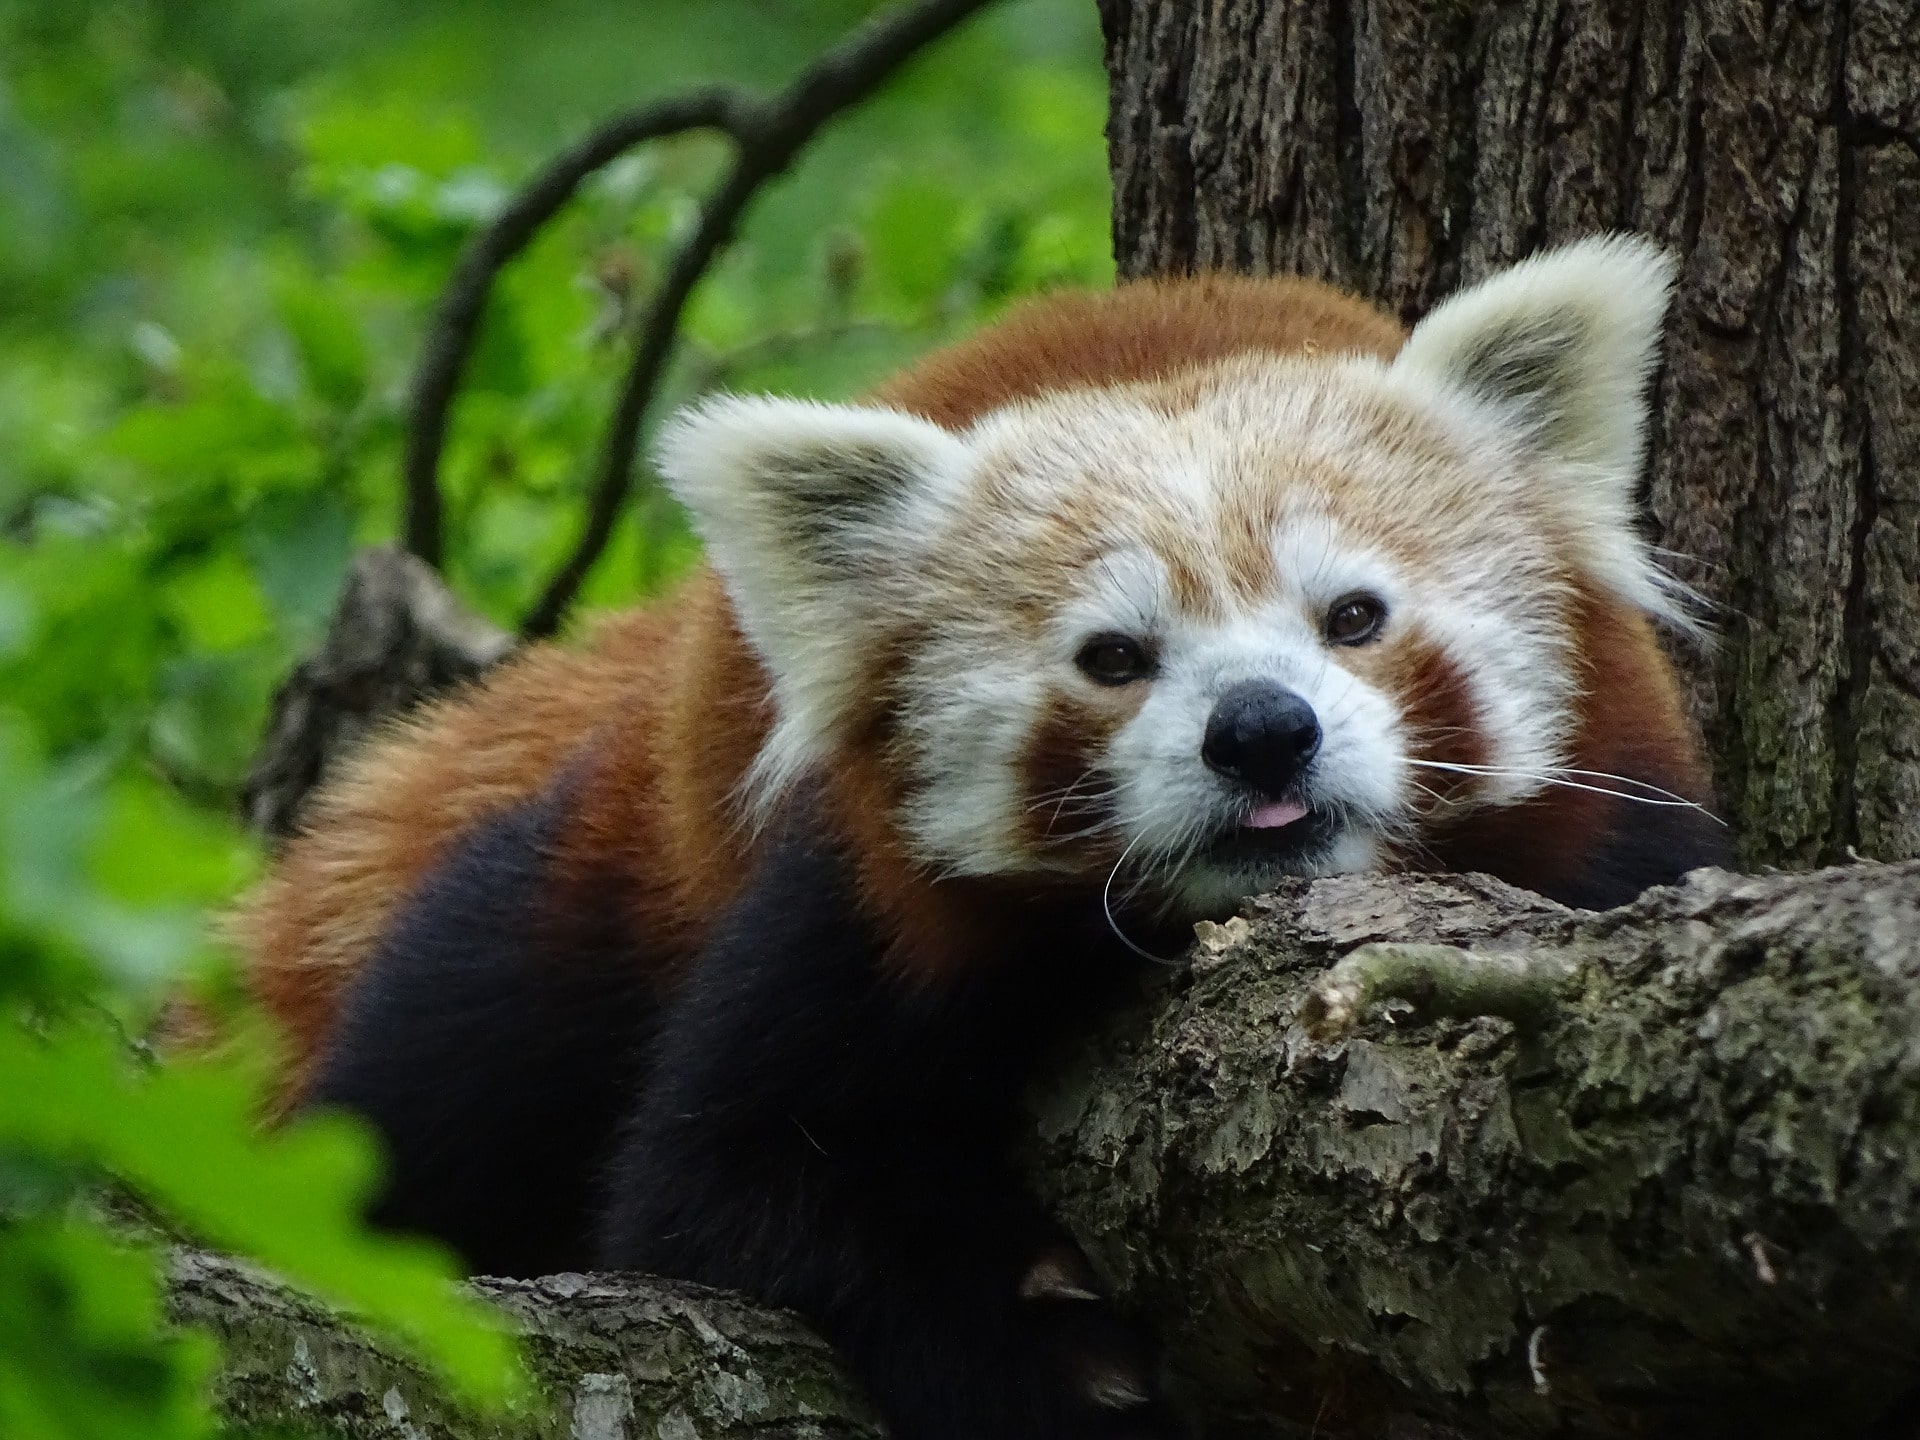 About the Red Panda, the Bamboo Chewing Panda from the Himalayas